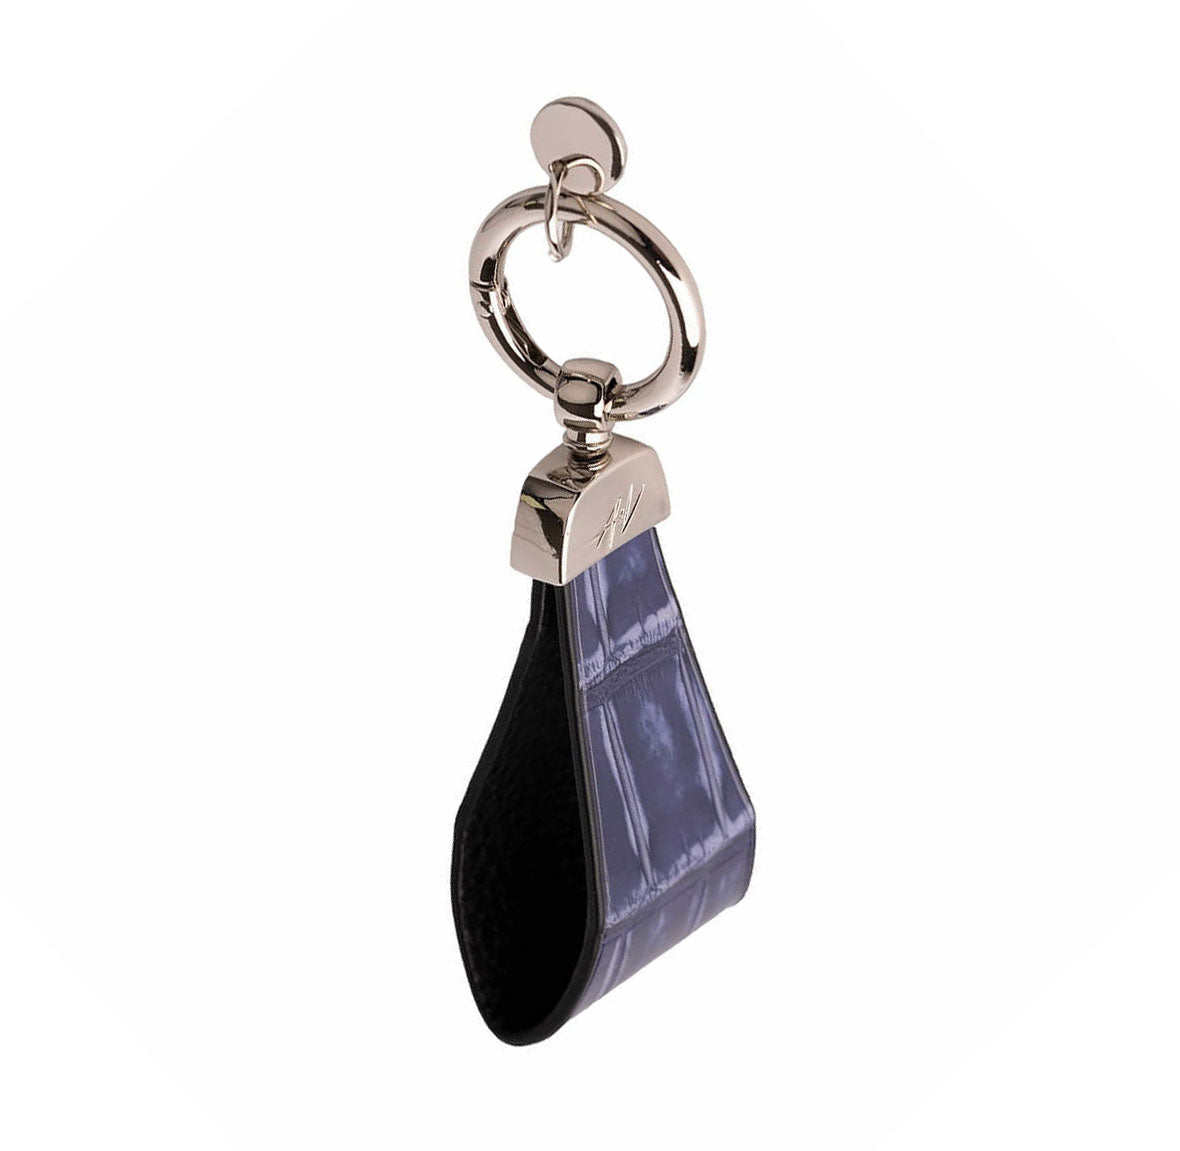 KEYCHAIN MOON BLUEBERRY HILL